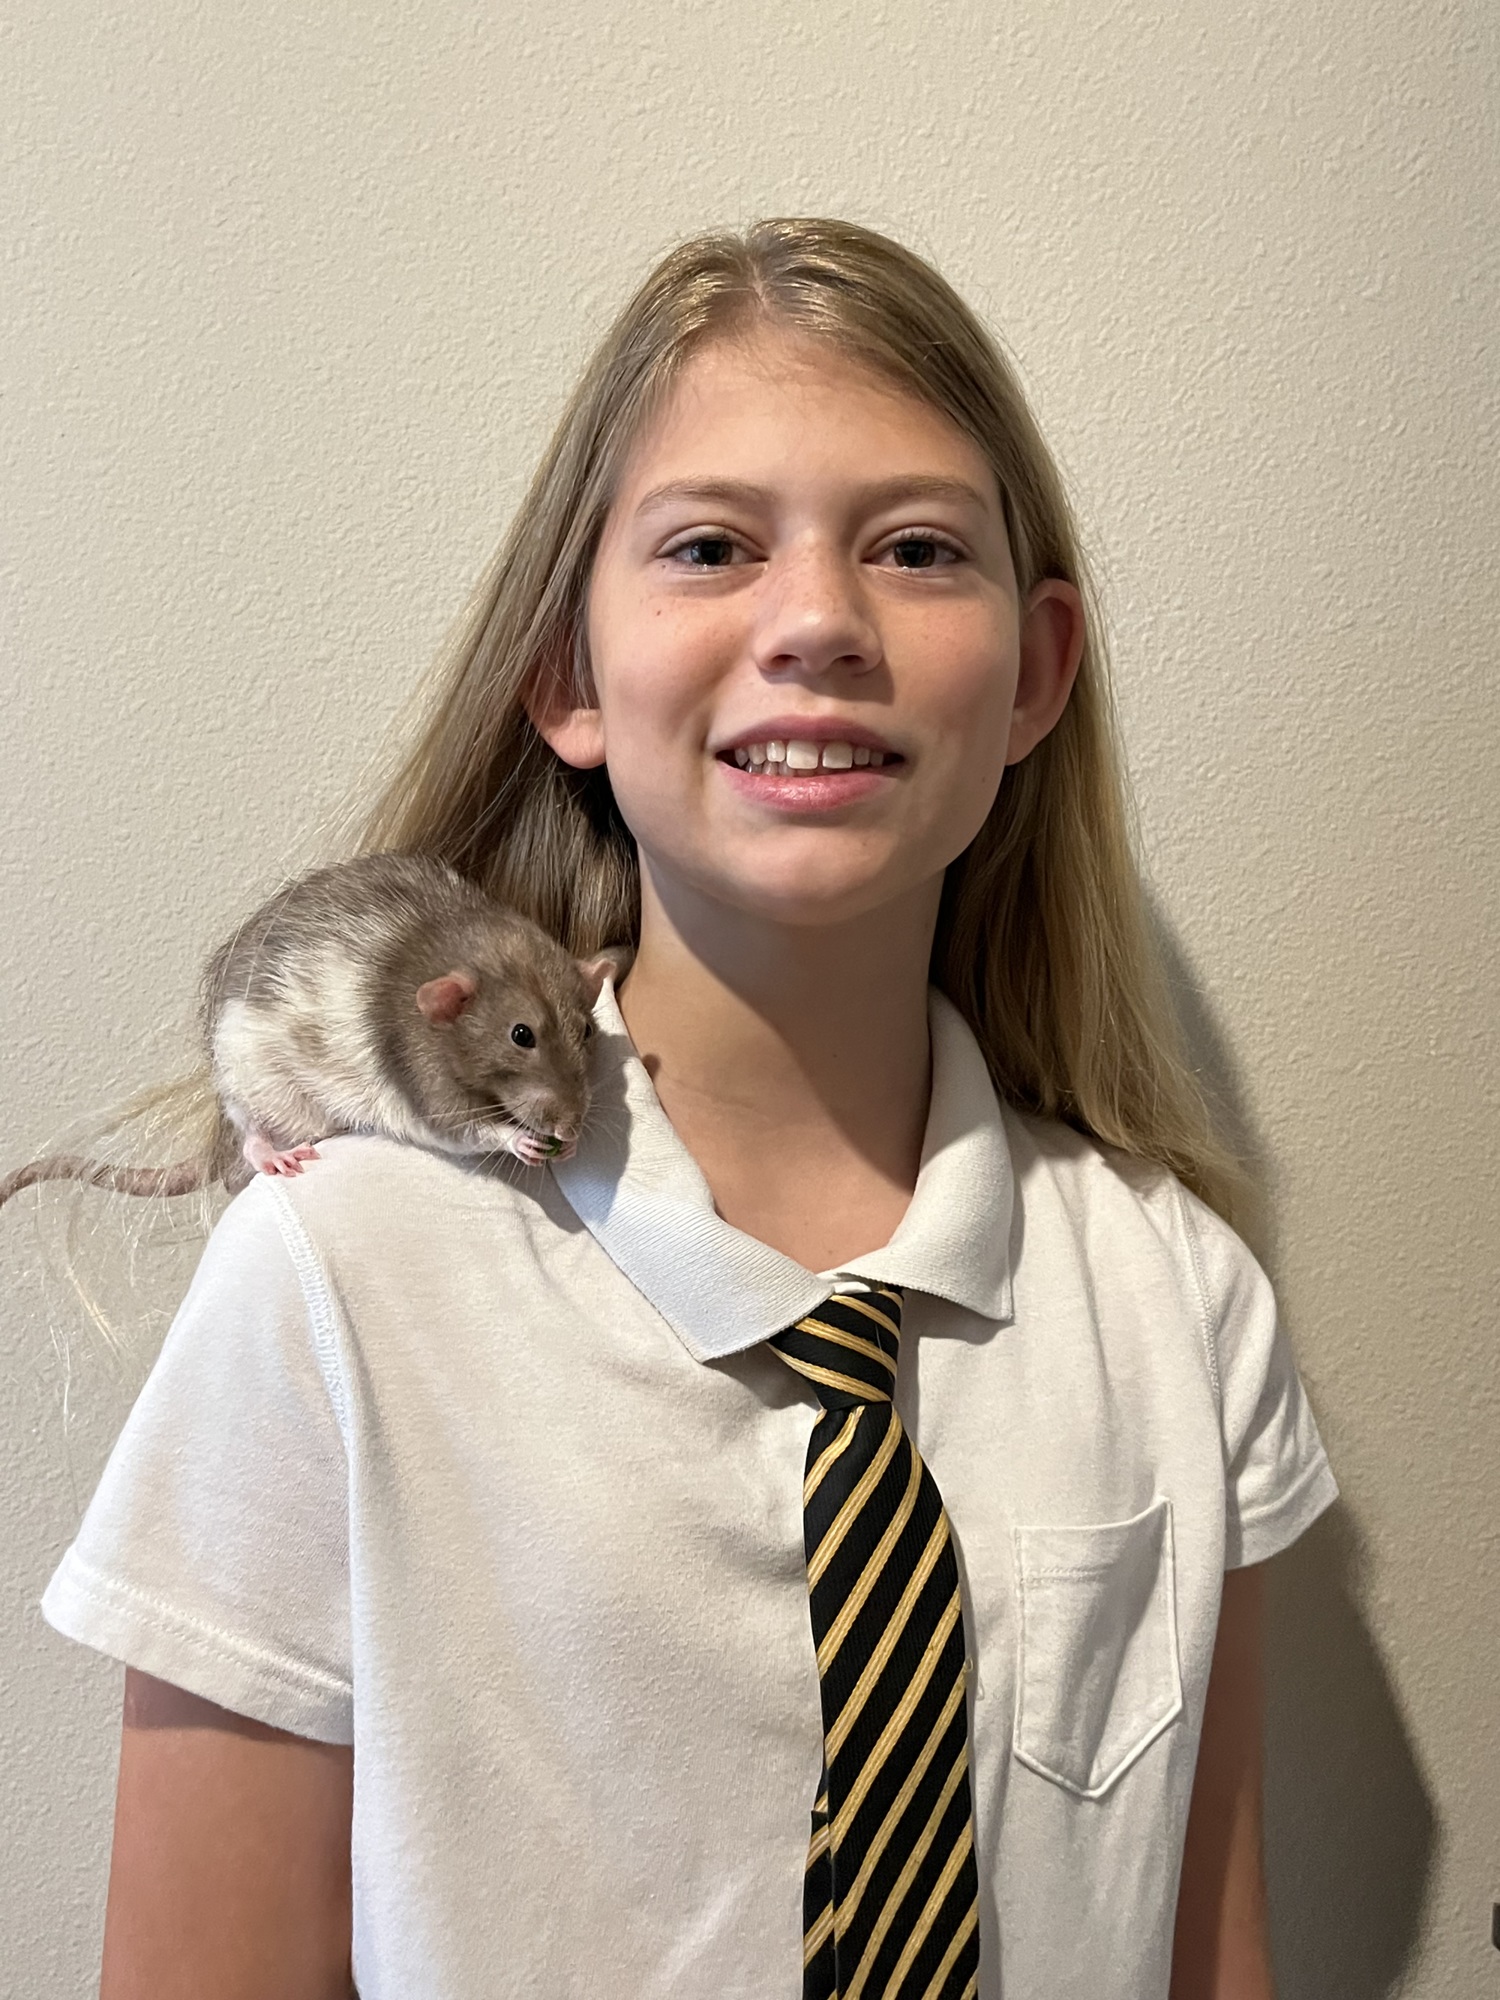 Lakewood Ranch's Lily Wojtkowski, who is 12, loves her pet rat, Pretzel. She didn't want to be away from him while at school, so she started drawing him. Now she has a comic book based on him. (Photo by Liz Ramos)